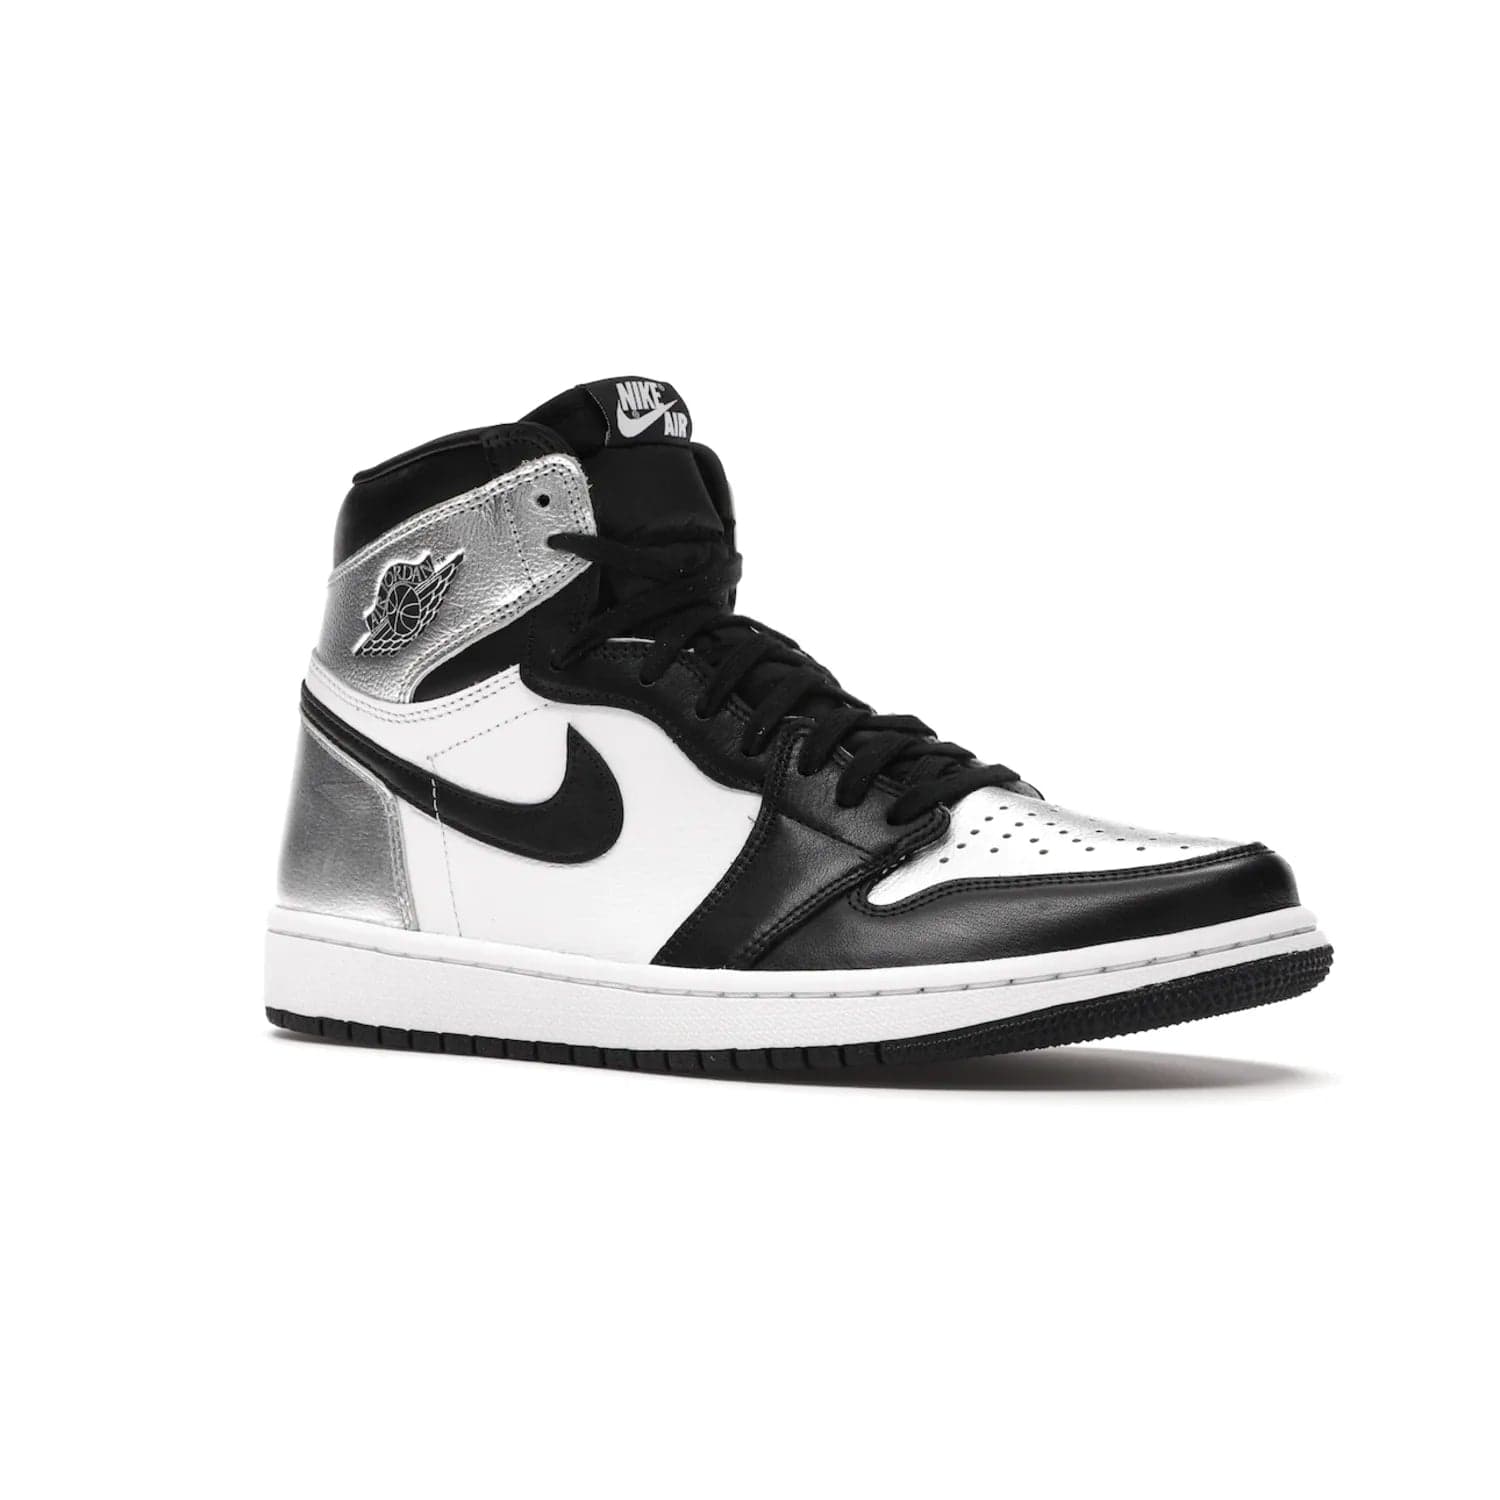 Jordan 1 Retro High Silver Toe (Women's) - Image 4 - Only at www.BallersClubKickz.com - Introducing the Jordan 1 Retro High Silver Toe (Women's): an updated spin on the iconic 'Black Toe' theme. Featuring white & black leather and silver patent leather construction. Nike Air branding, Air Jordan Wings logo, and white/black sole finish give a classic look. The perfect addition to an on-trend streetwear look. Available in classic black & white, this Jordan 1 is an instant classic. Released in February 202